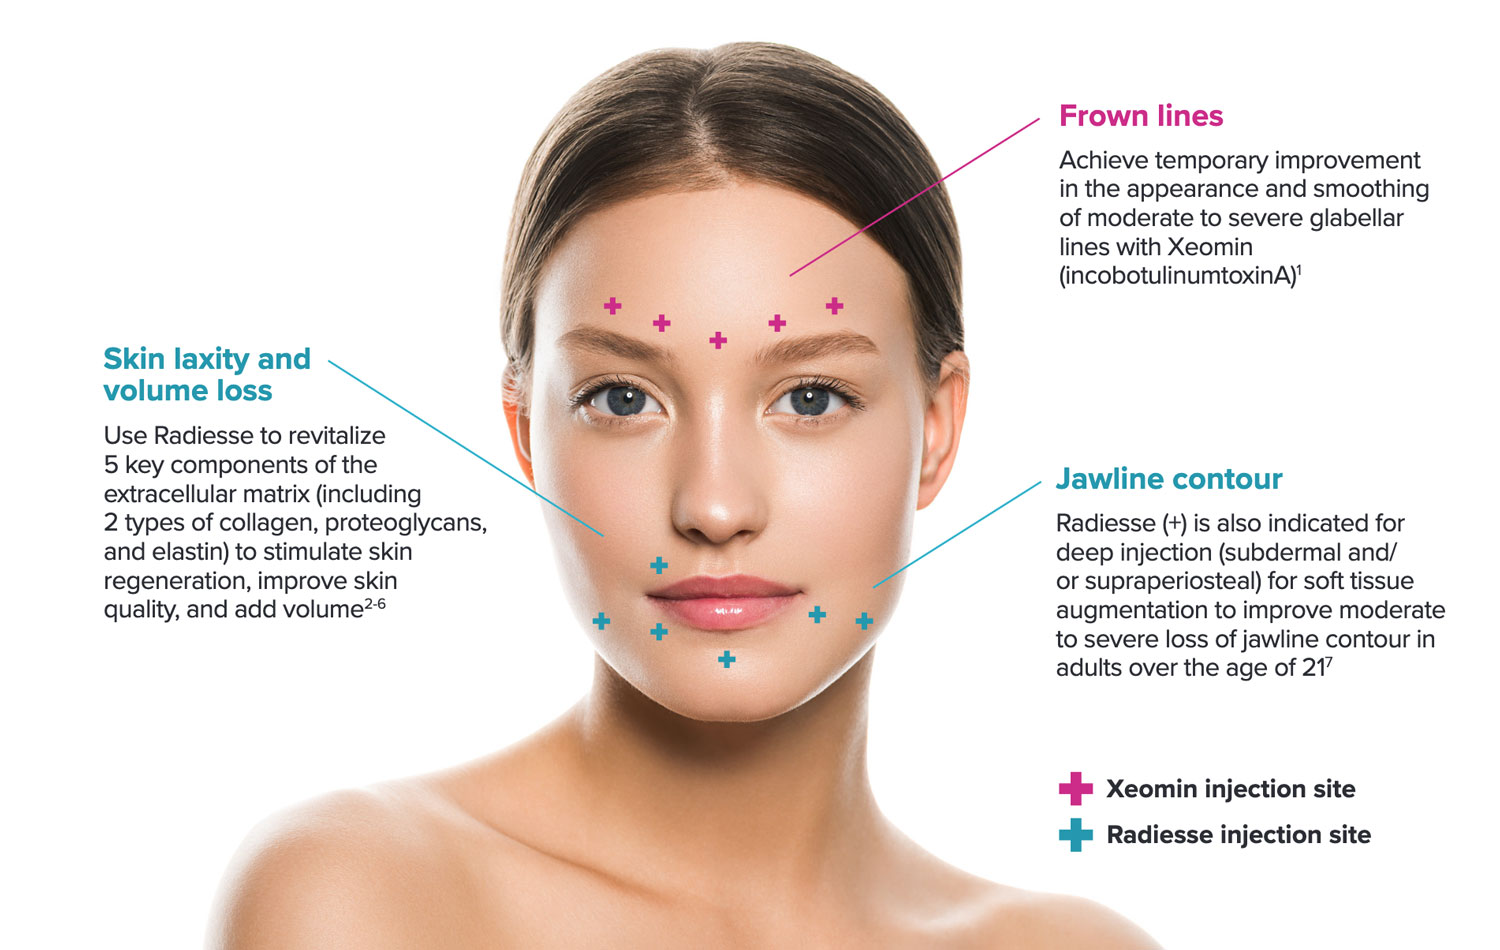 Face diagram showing injection sites for Radiesse and Xeomin fillers.